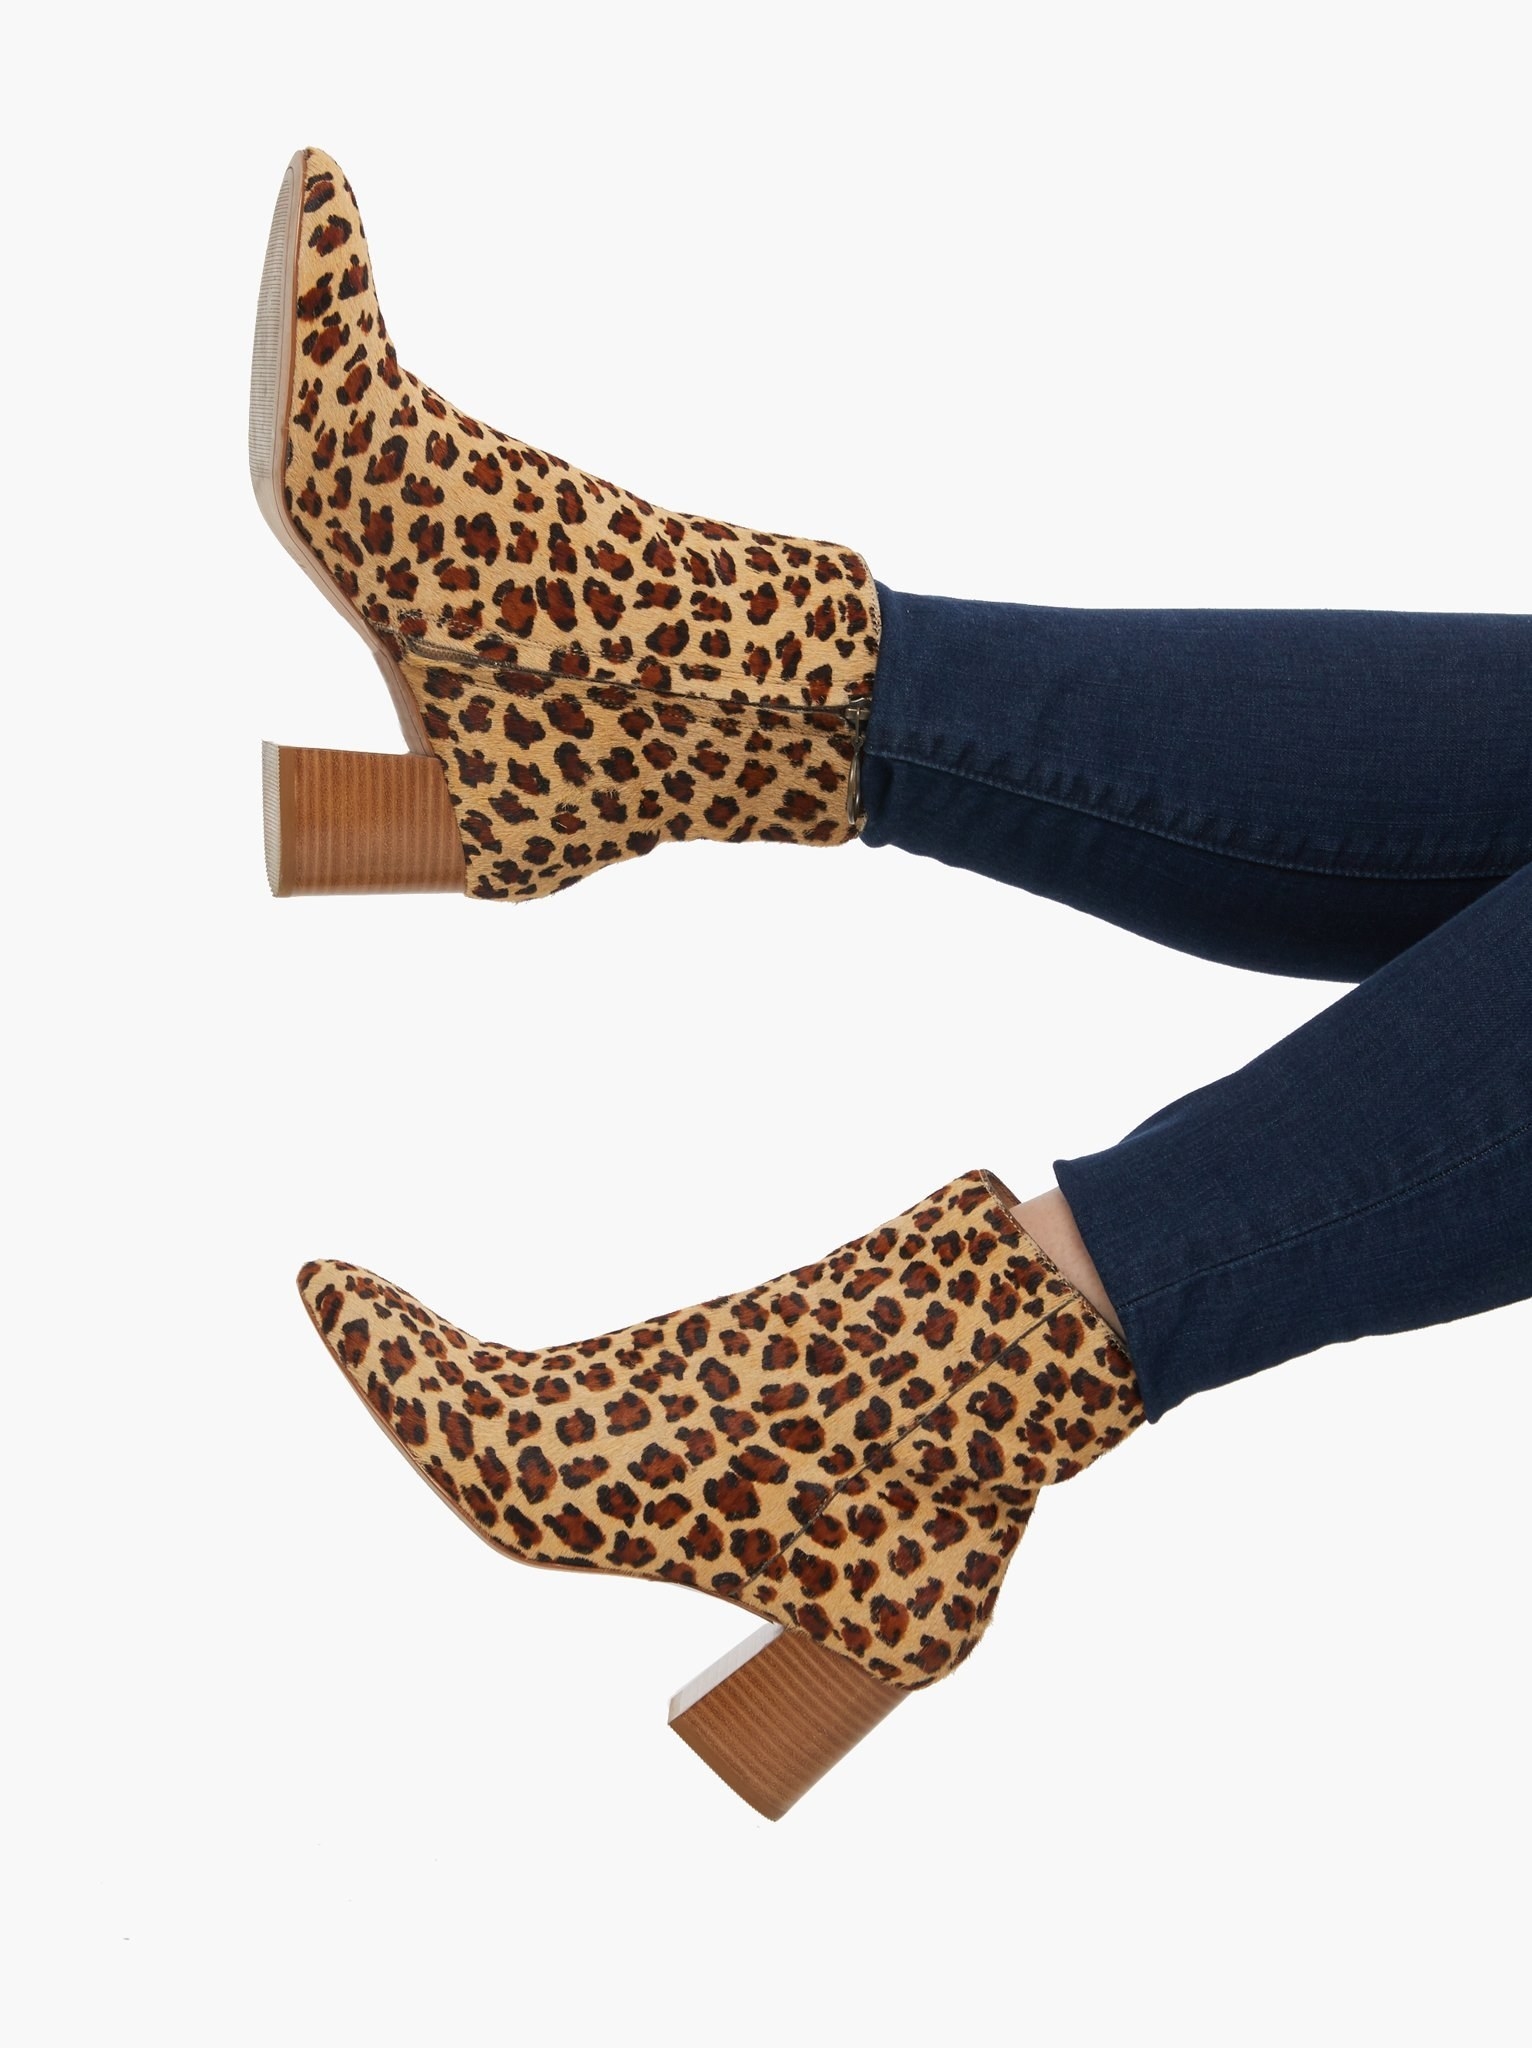 Model wearing the cheetah-print boots with a brown block heel